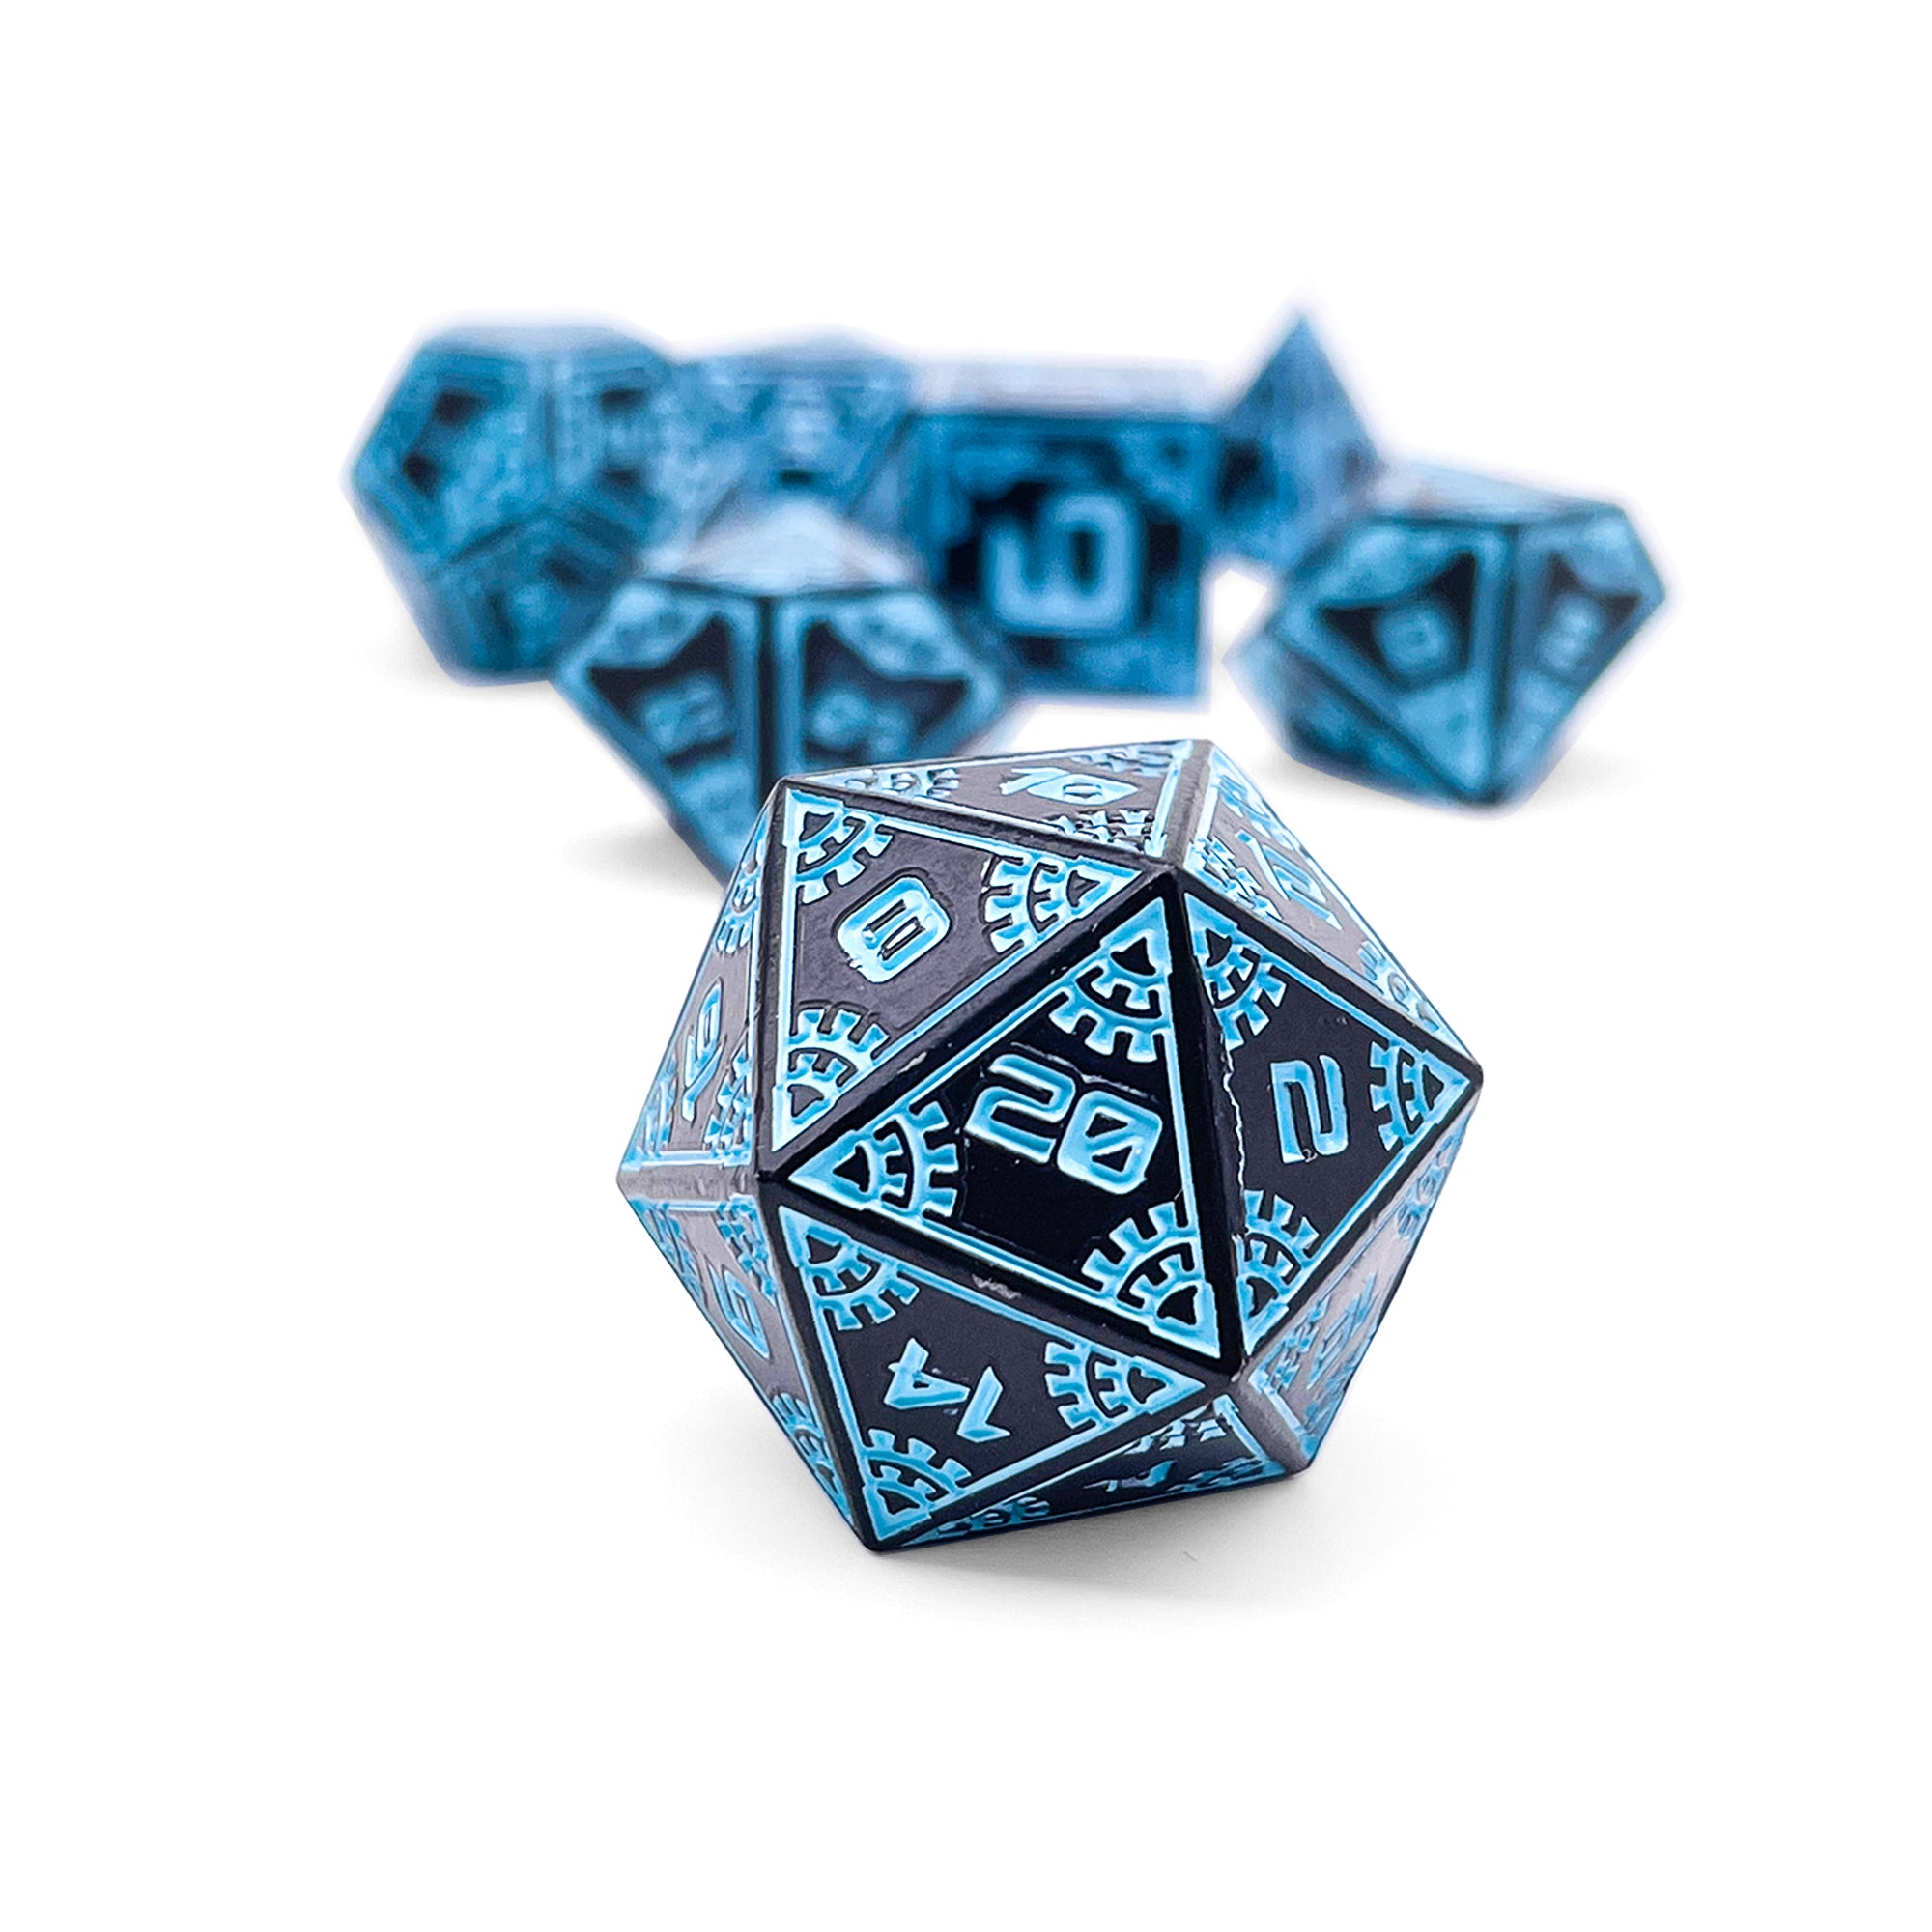 Force Field - Space Dice 7 Piece RPG Set